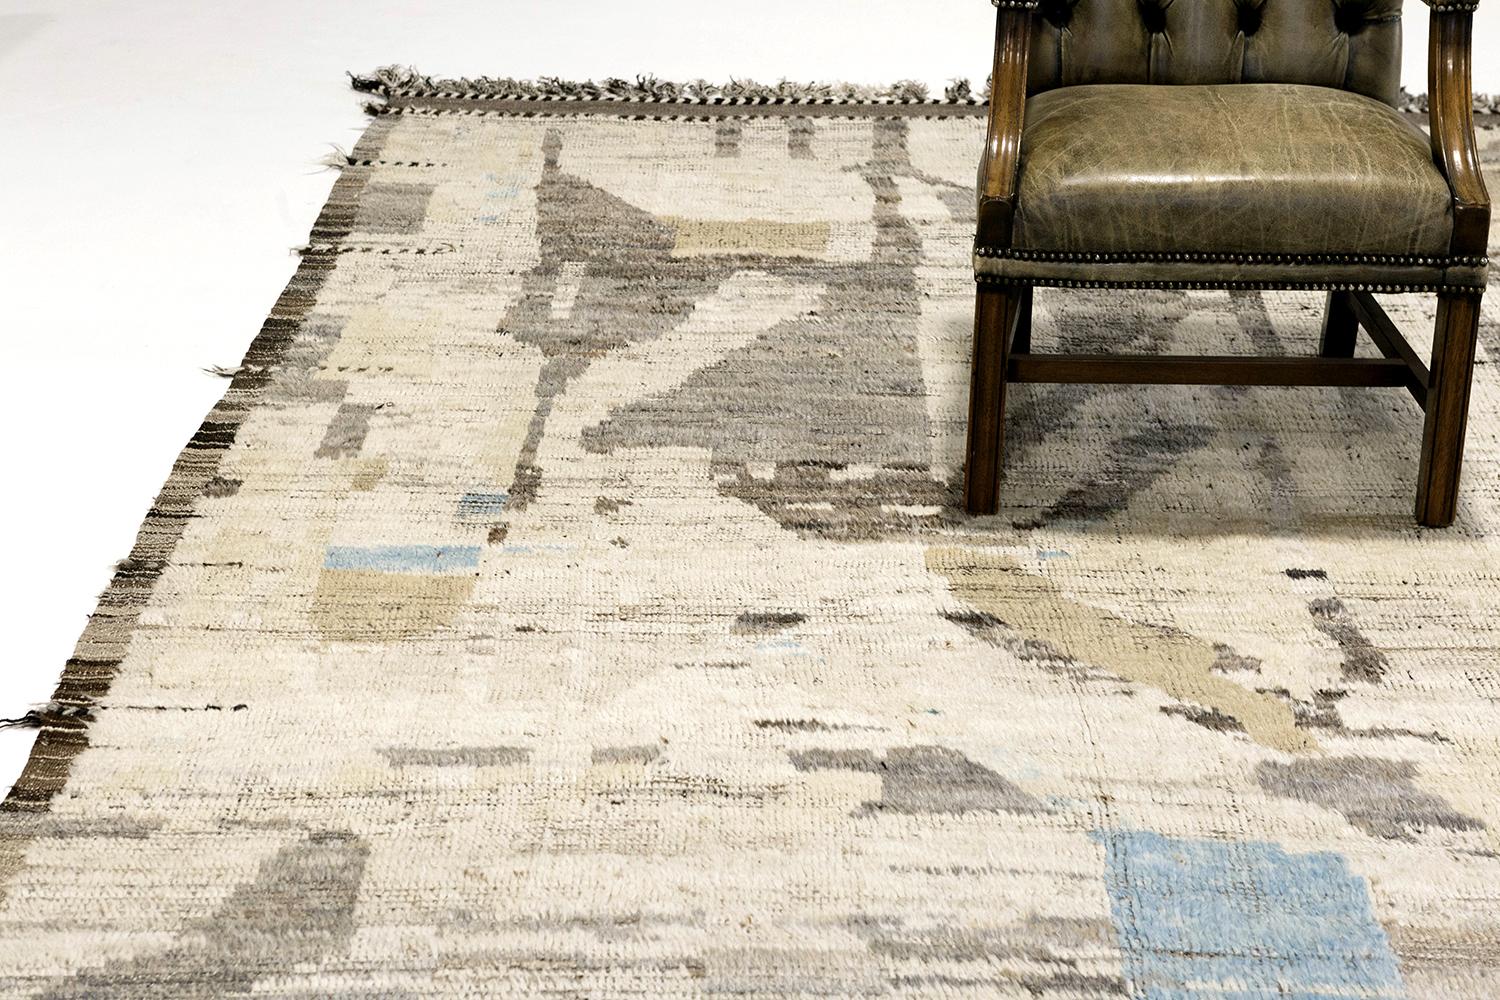 'Dakhla' is a beautifully textured rug with irregular motifs inspired from the Atlas Mountains of Morocco. Earth toned colored shag and hints of color work cohesively to make for a great contemporary interpretation for the modern design world.